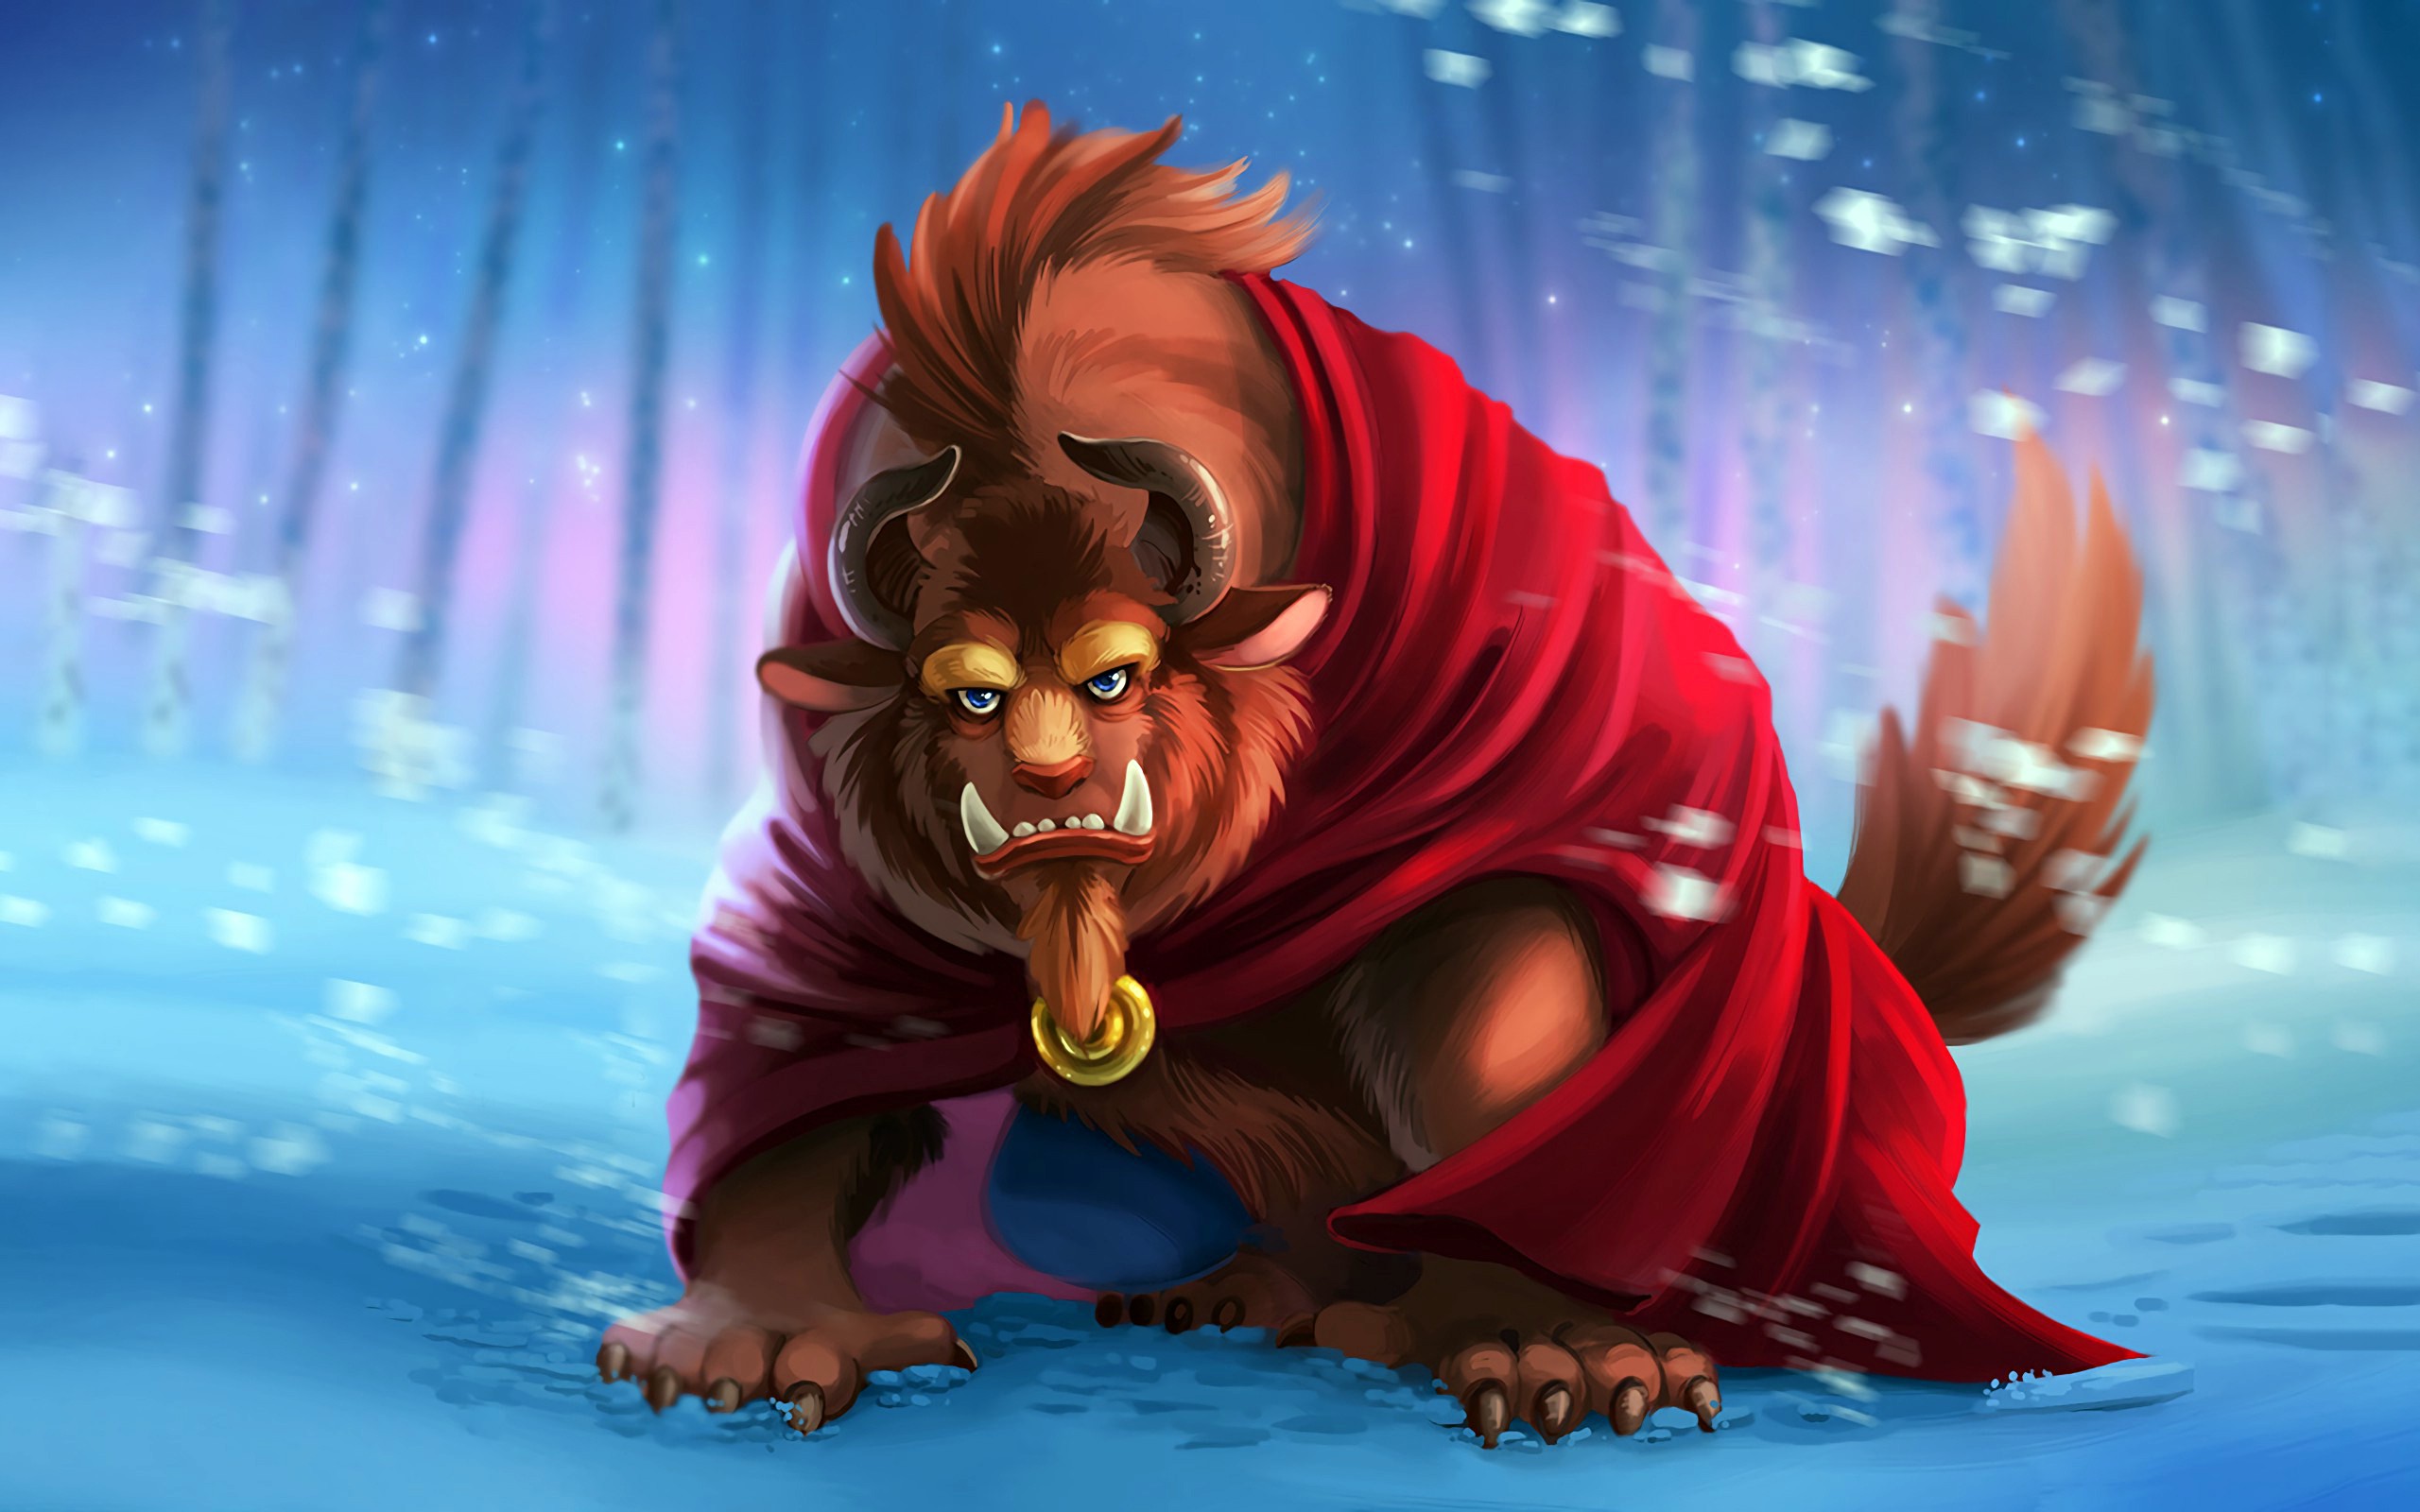 General 2560x1600 Beauty and the Beast Disney animated movies artwork horns creature